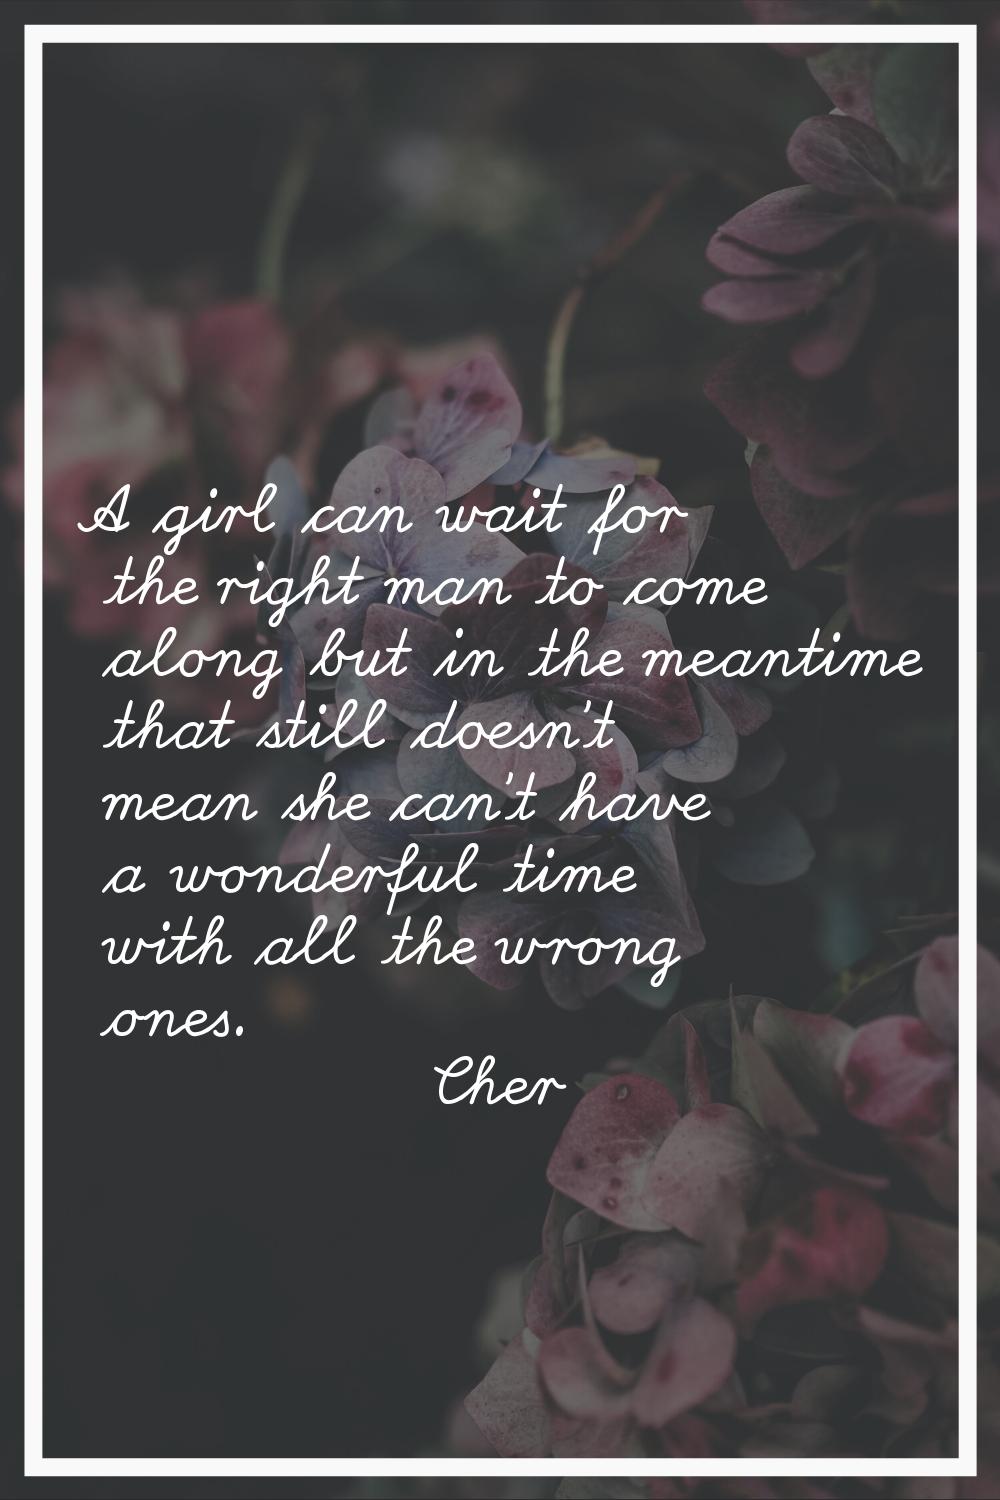 A girl can wait for the right man to come along but in the meantime that still doesn't mean she can